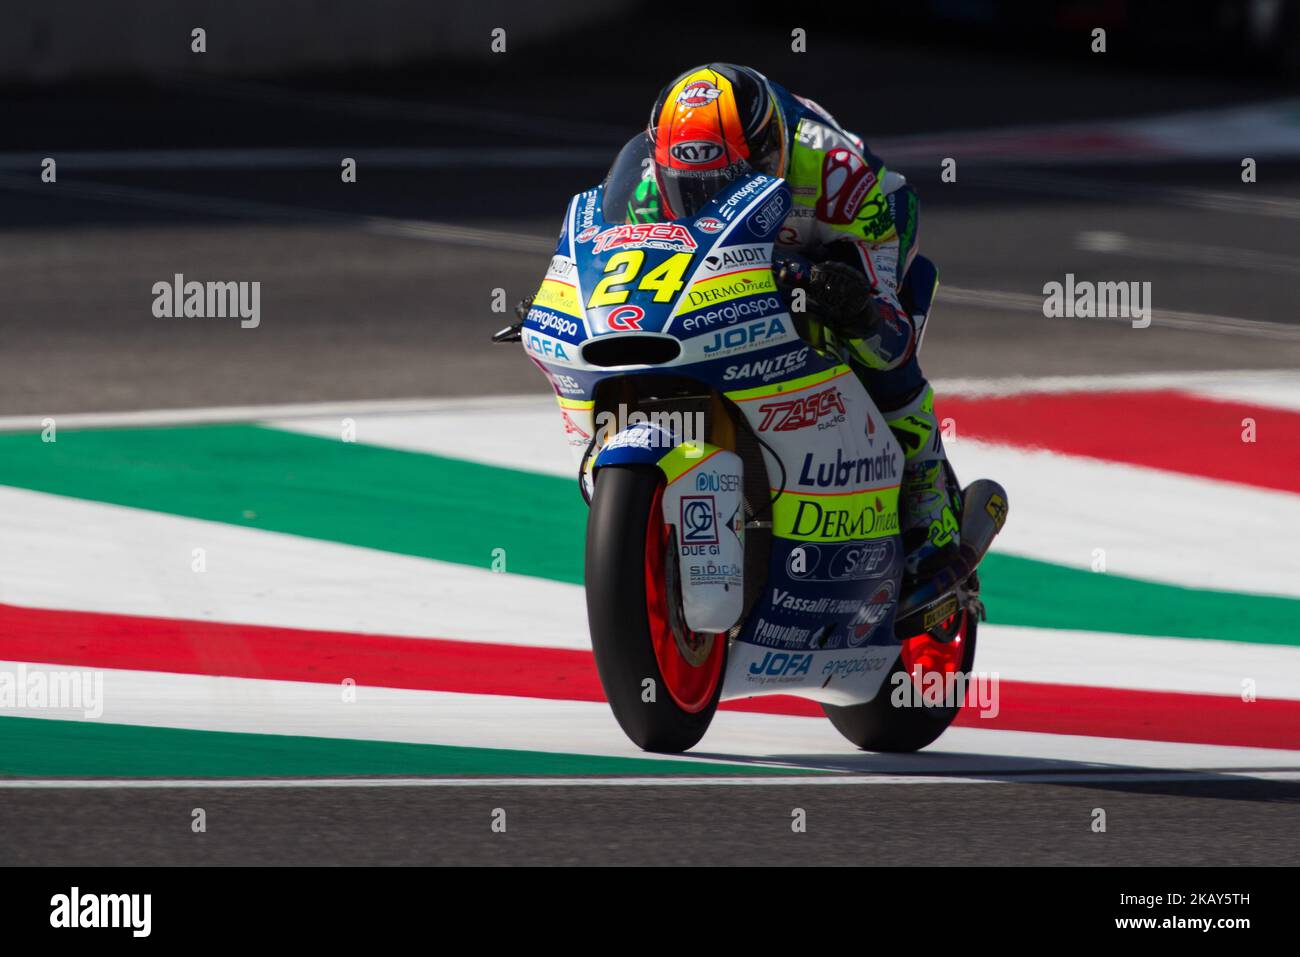 Simone Corsi of Tasca Racing during the warm-up of the Oakley Grand Prix of Italy, at International Circuit of Mugello, on May 31, 2018 in Mugello, Italy (Photo by Danilo Di Giovanni/NurPhoto) Stock Photo